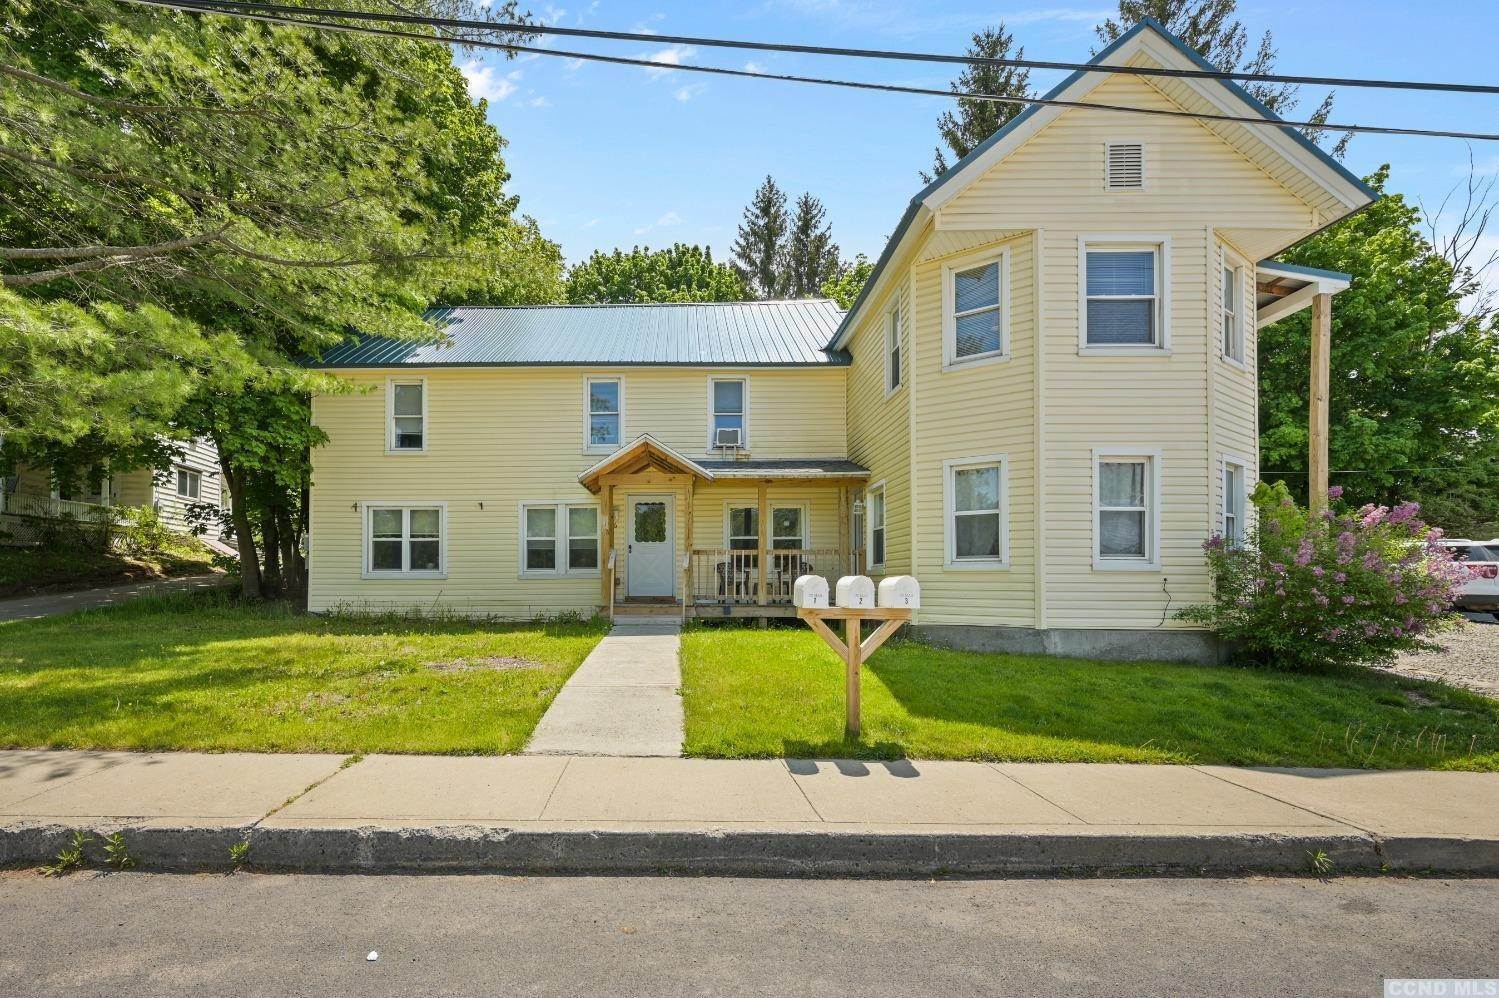 Multi-Family Homes for Sale at 6 Roosevelt Avenue Stamford, New York 12167 United States